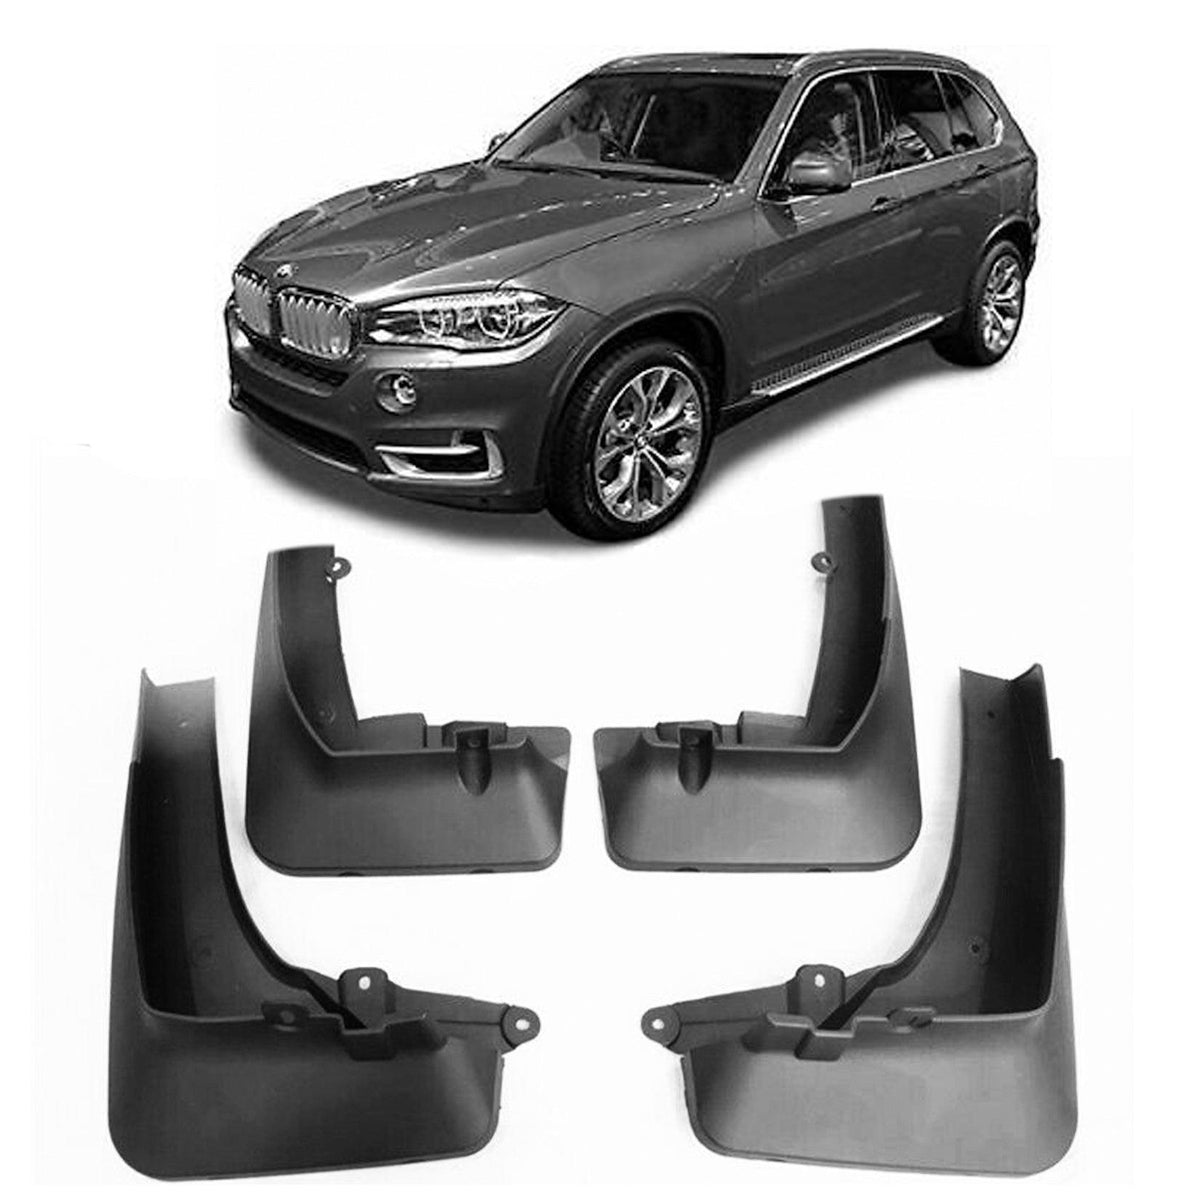 BMW X5 F15 2014-2018 OE STYLE MUD FLAP SET – FOR MODELS WITH SIDE STEPS - RisperStyling